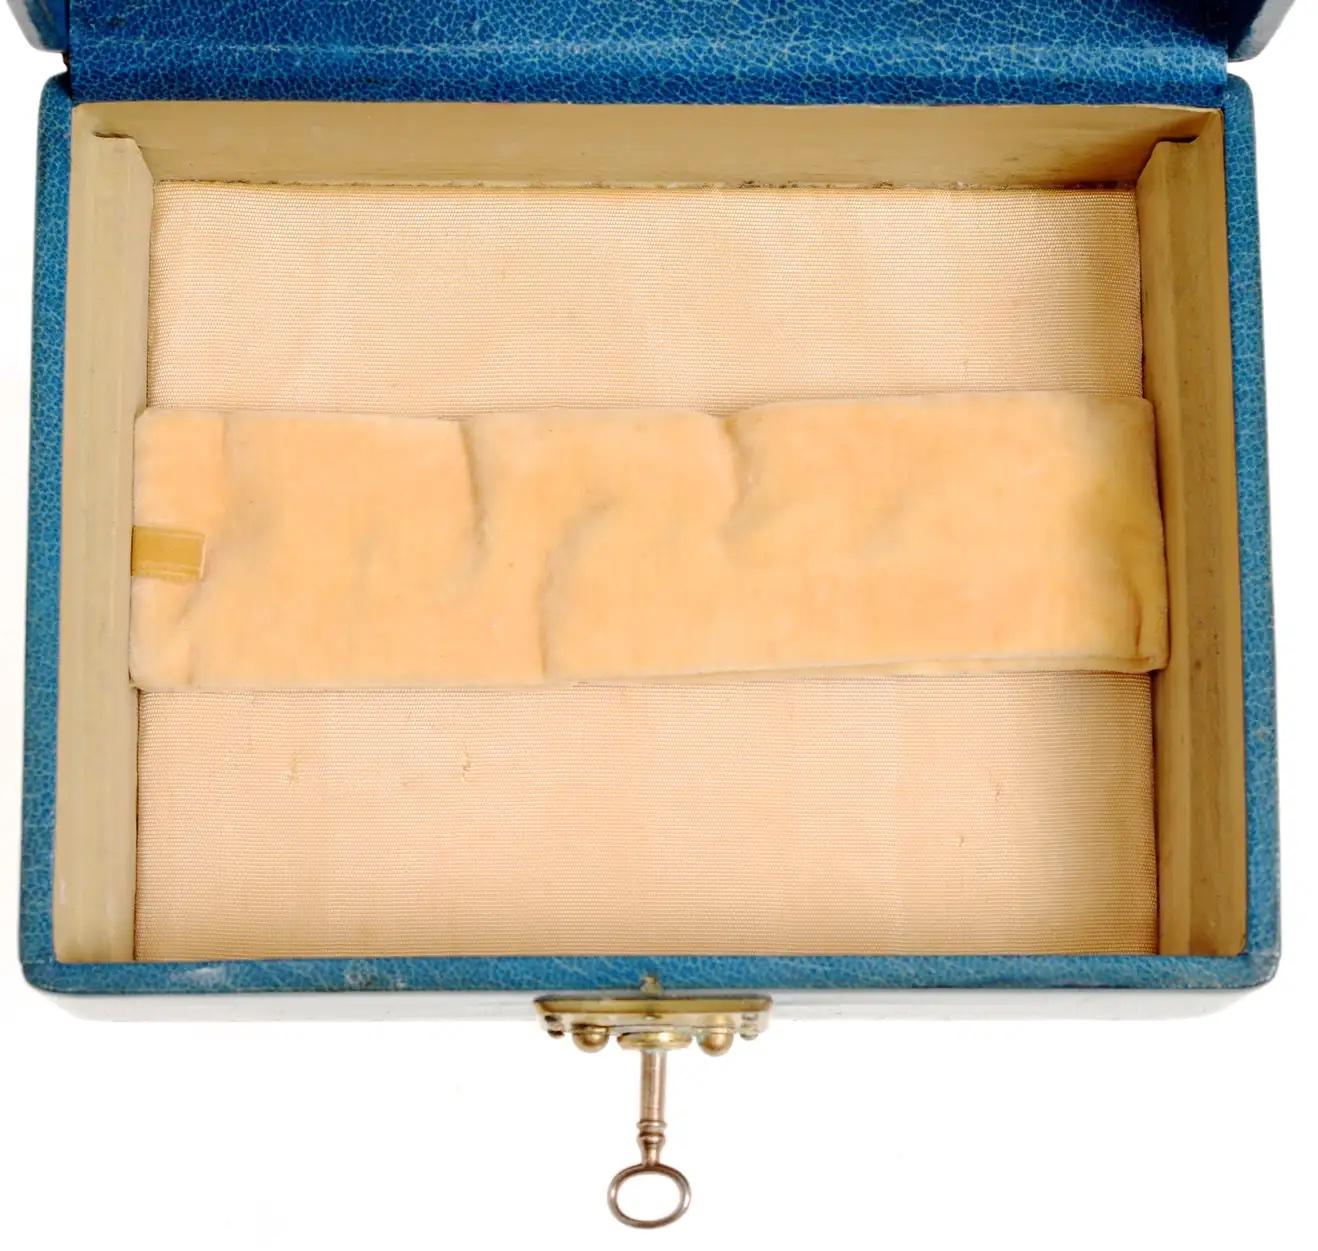 Abercrombie & Fitch Patinated Fine Blue Calf Leather Covered Jewelry Box, C1950 For Sale 1